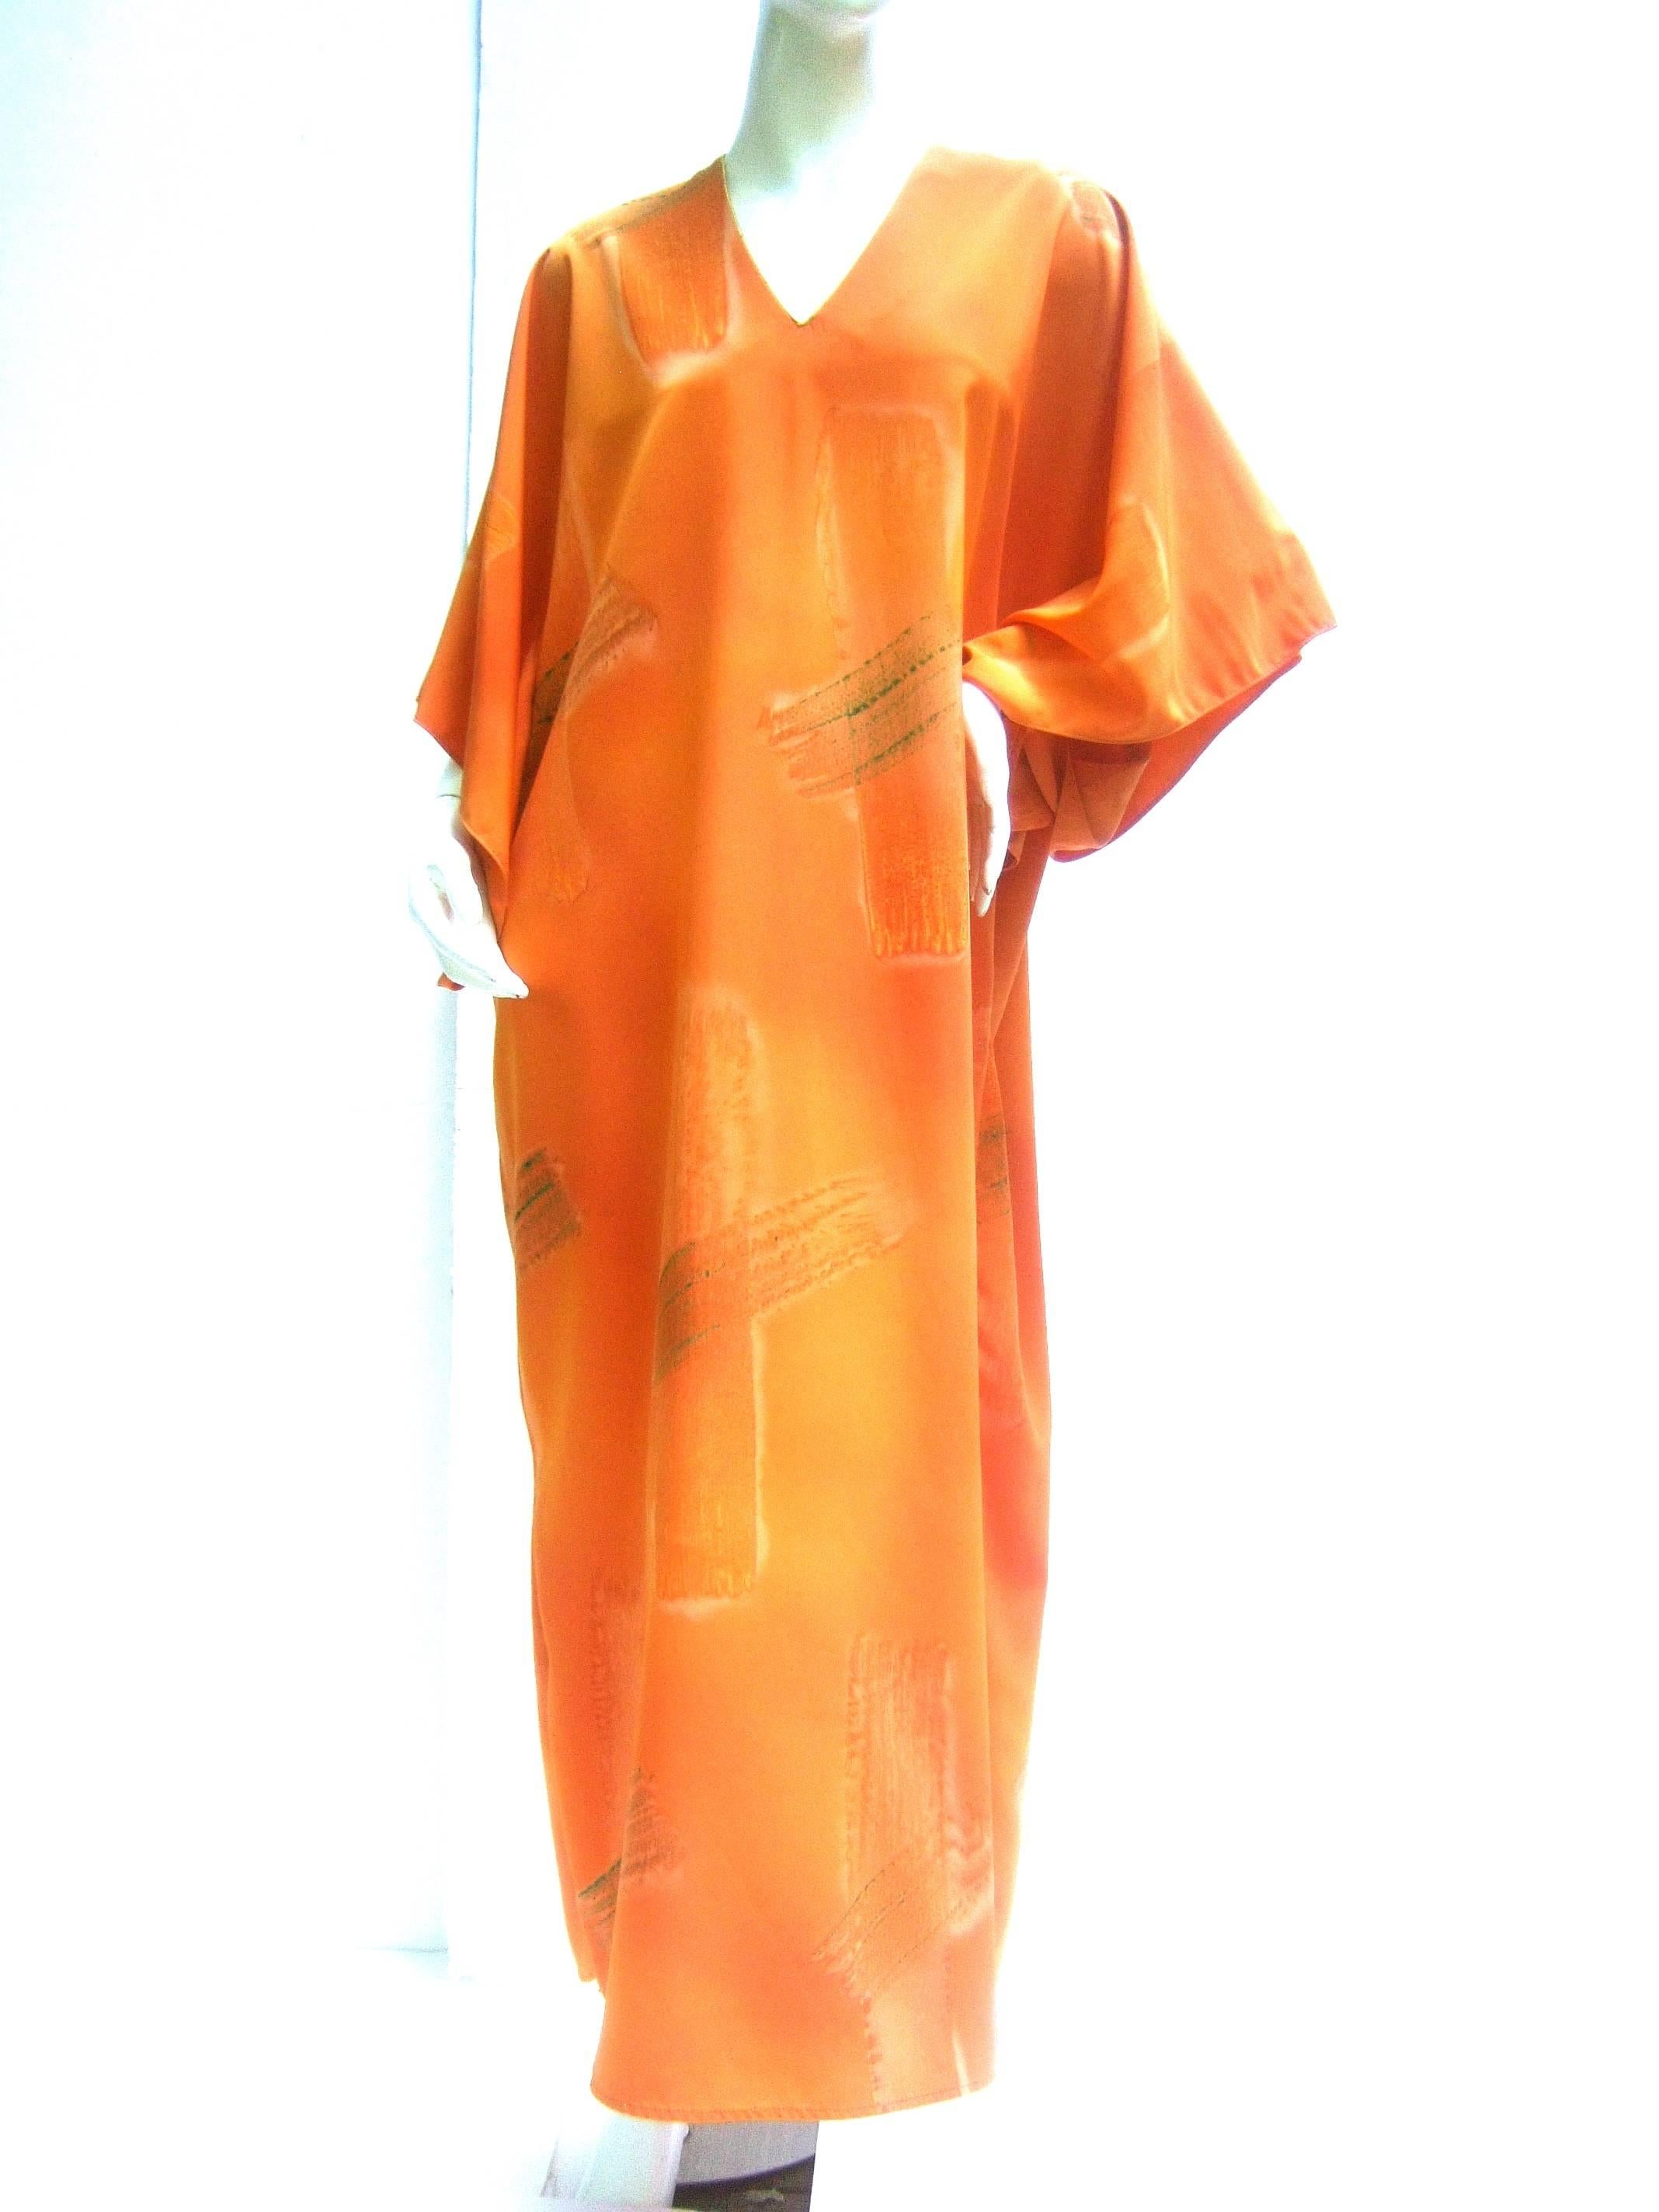 Women's Reserved Sale Pending Chic Tangerine Caftan Lounge Gown for Neiman Marcus c 1990